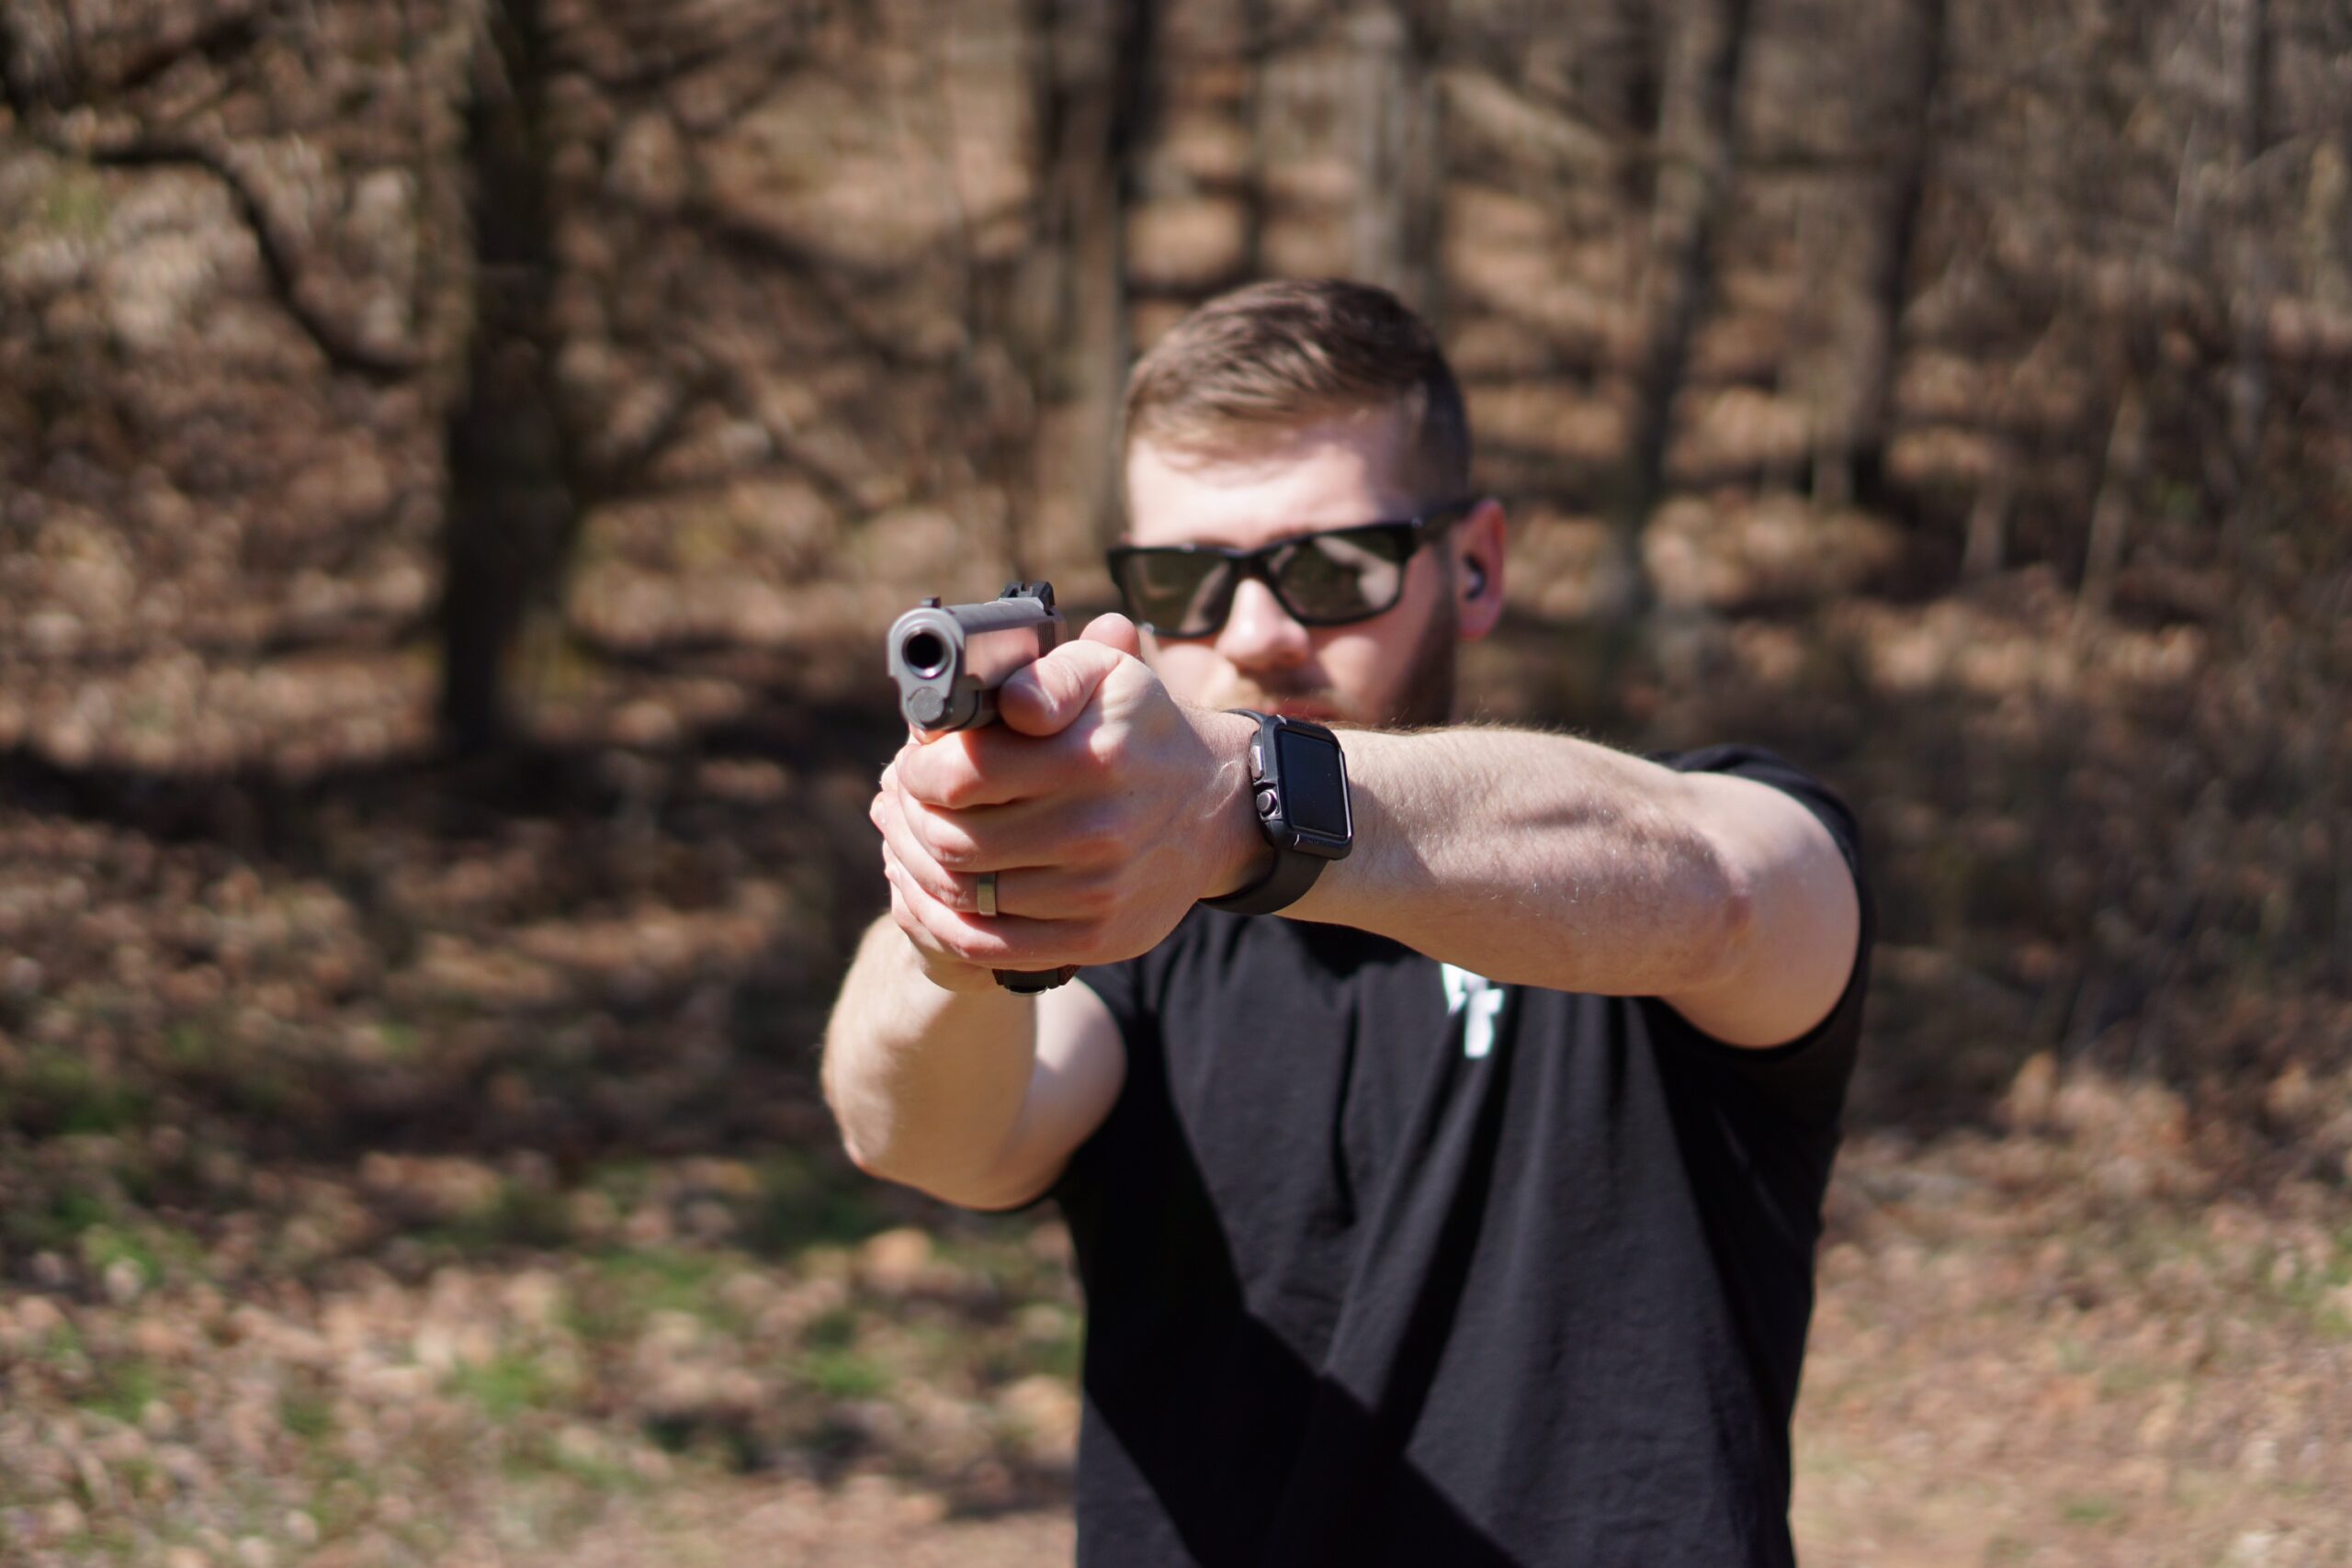 The Author firing a Dan Wesson 1911 Classic pistol at a shooting range